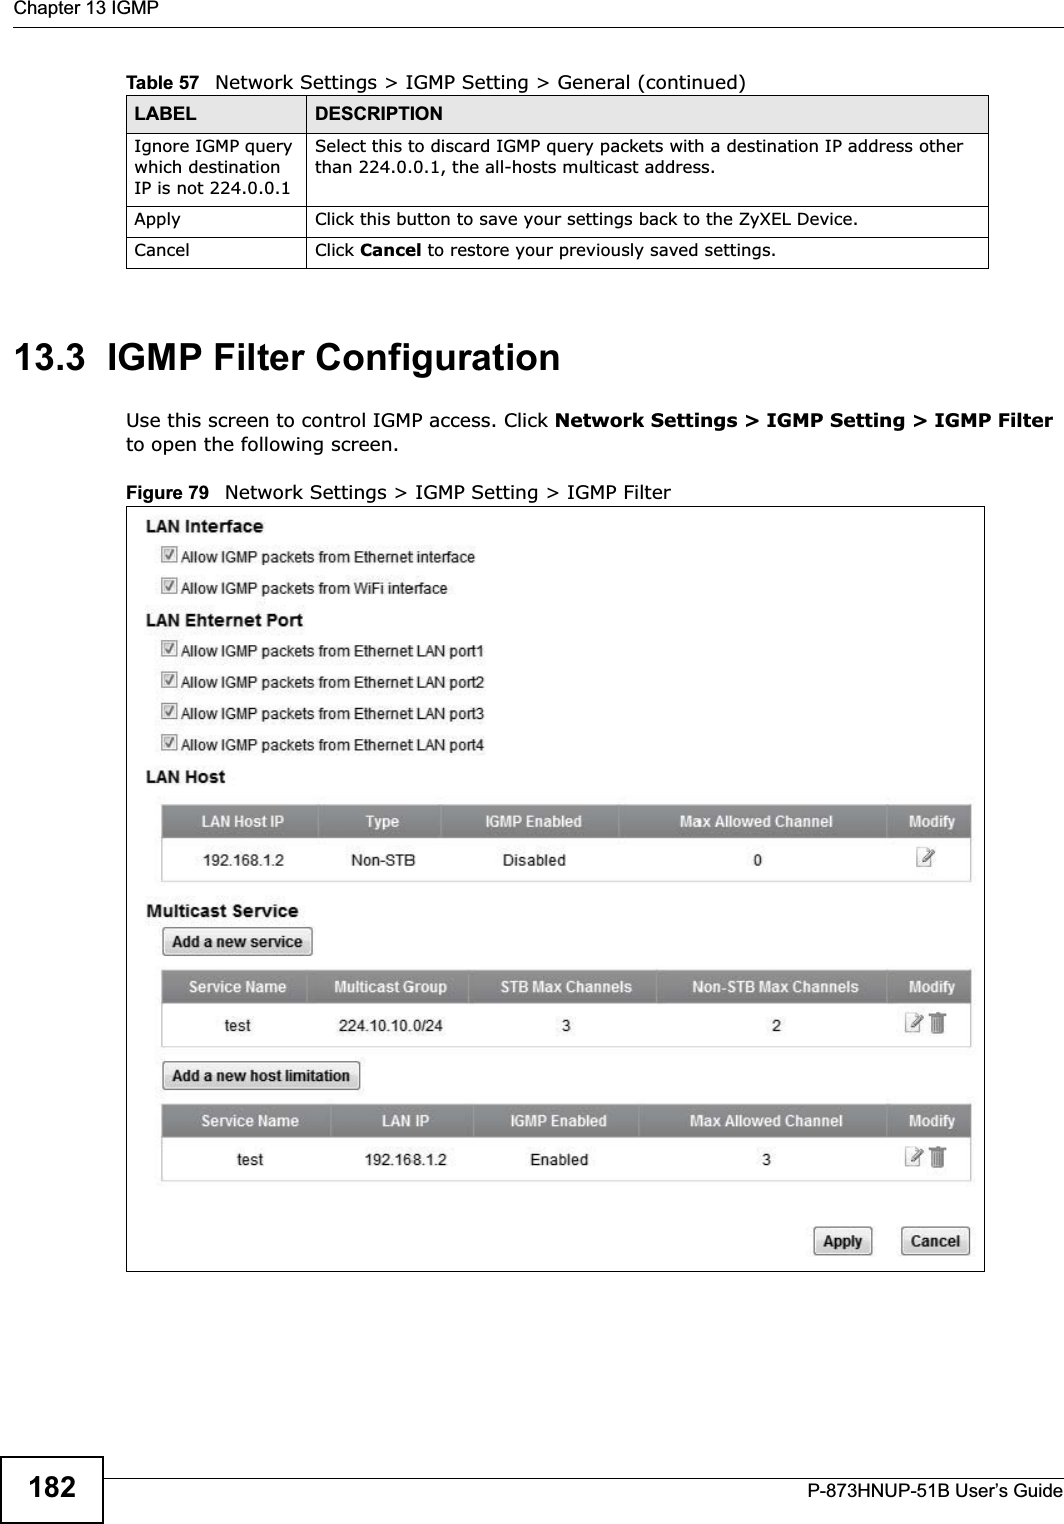 Chapter 13 IGMPP-873HNUP-51B User’s Guide18213.3  IGMP Filter ConfigurationUse this screen to control IGMP access. Click Network Settings &gt; IGMP Setting &gt; IGMP Filterto open the following screen. Figure 79   Network Settings &gt; IGMP Setting &gt; IGMP Filter  Ignore IGMP query which destination IP is not 224.0.0.1 Select this to discard IGMP query packets with a destination IP address other than 224.0.0.1, the all-hosts multicast address.Apply Click this button to save your settings back to the ZyXEL Device.Cancel Click Cancel to restore your previously saved settings.Table 57   Network Settings &gt; IGMP Setting &gt; General (continued)LABEL DESCRIPTION